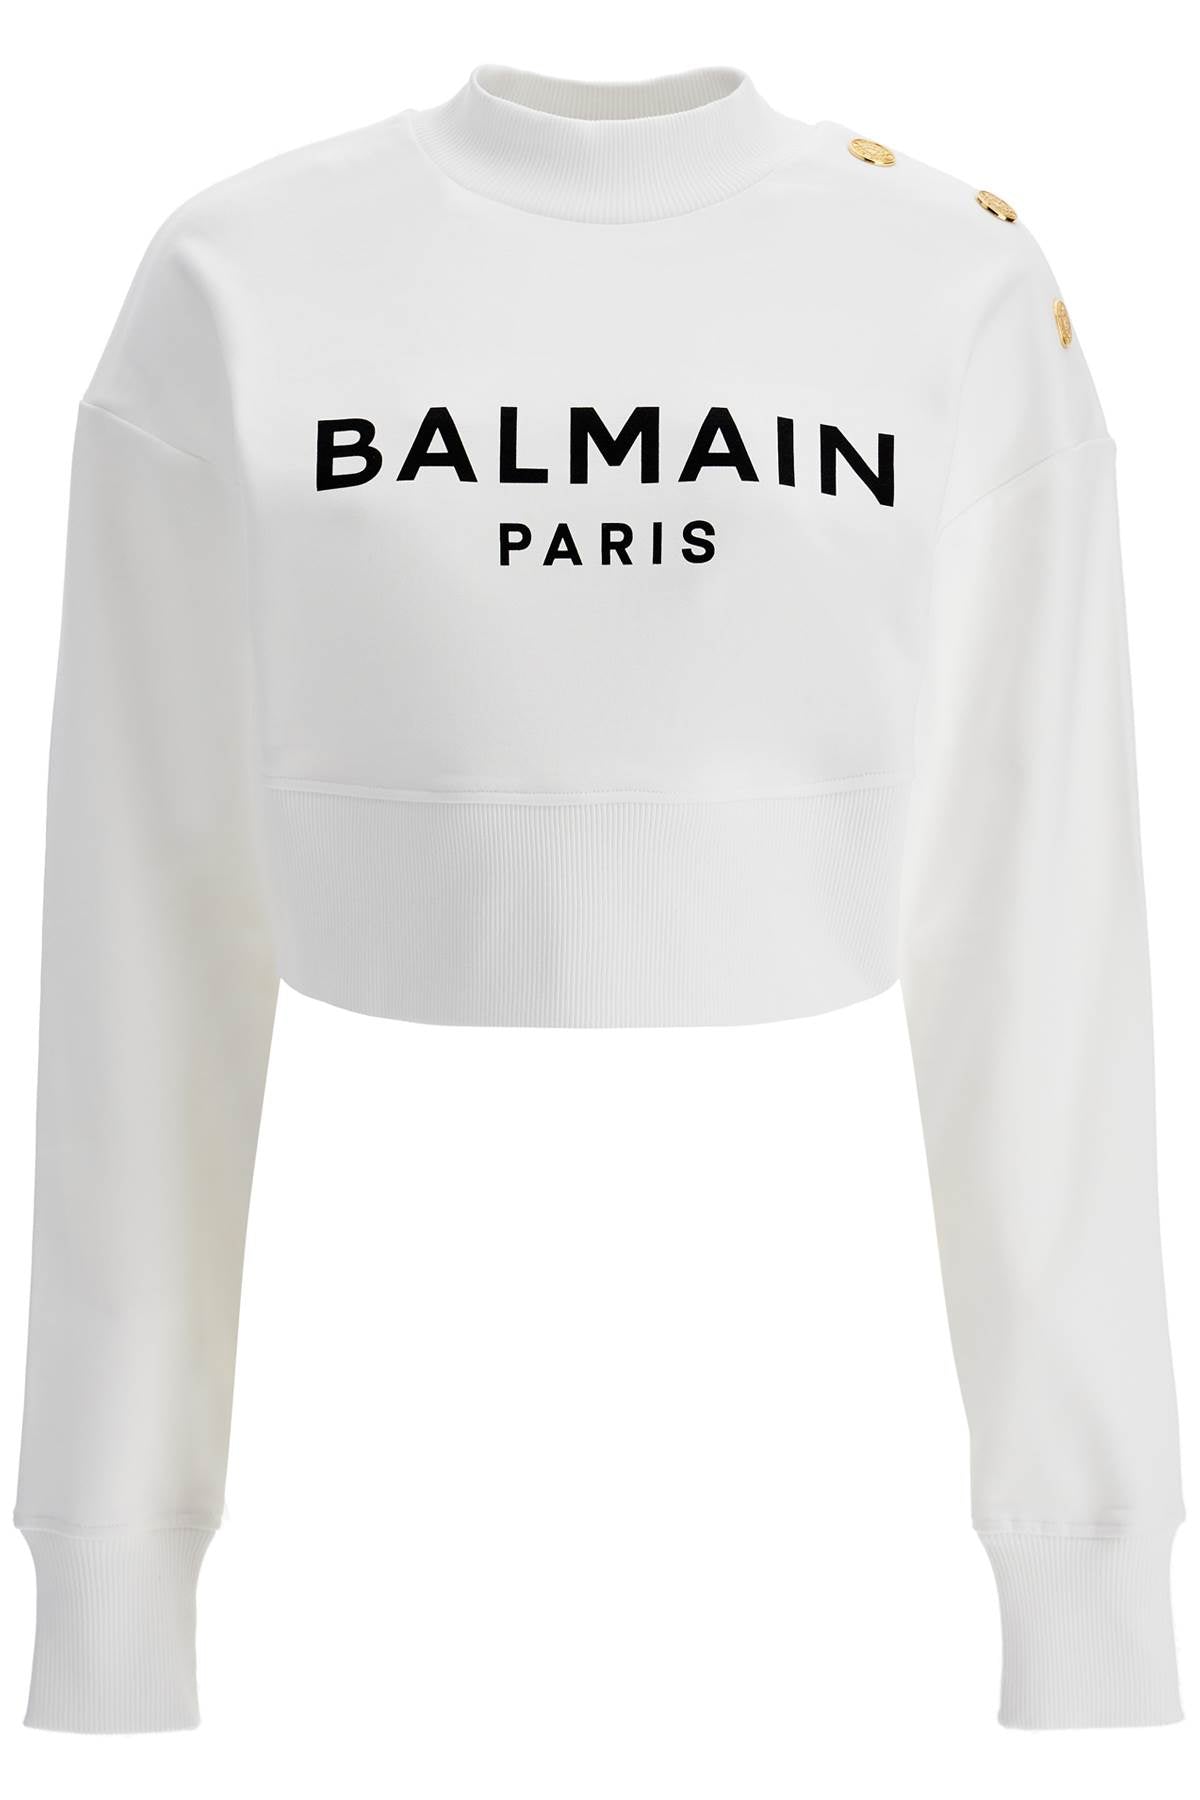 Balmain Cropped Sweatshirt With Buttons   White